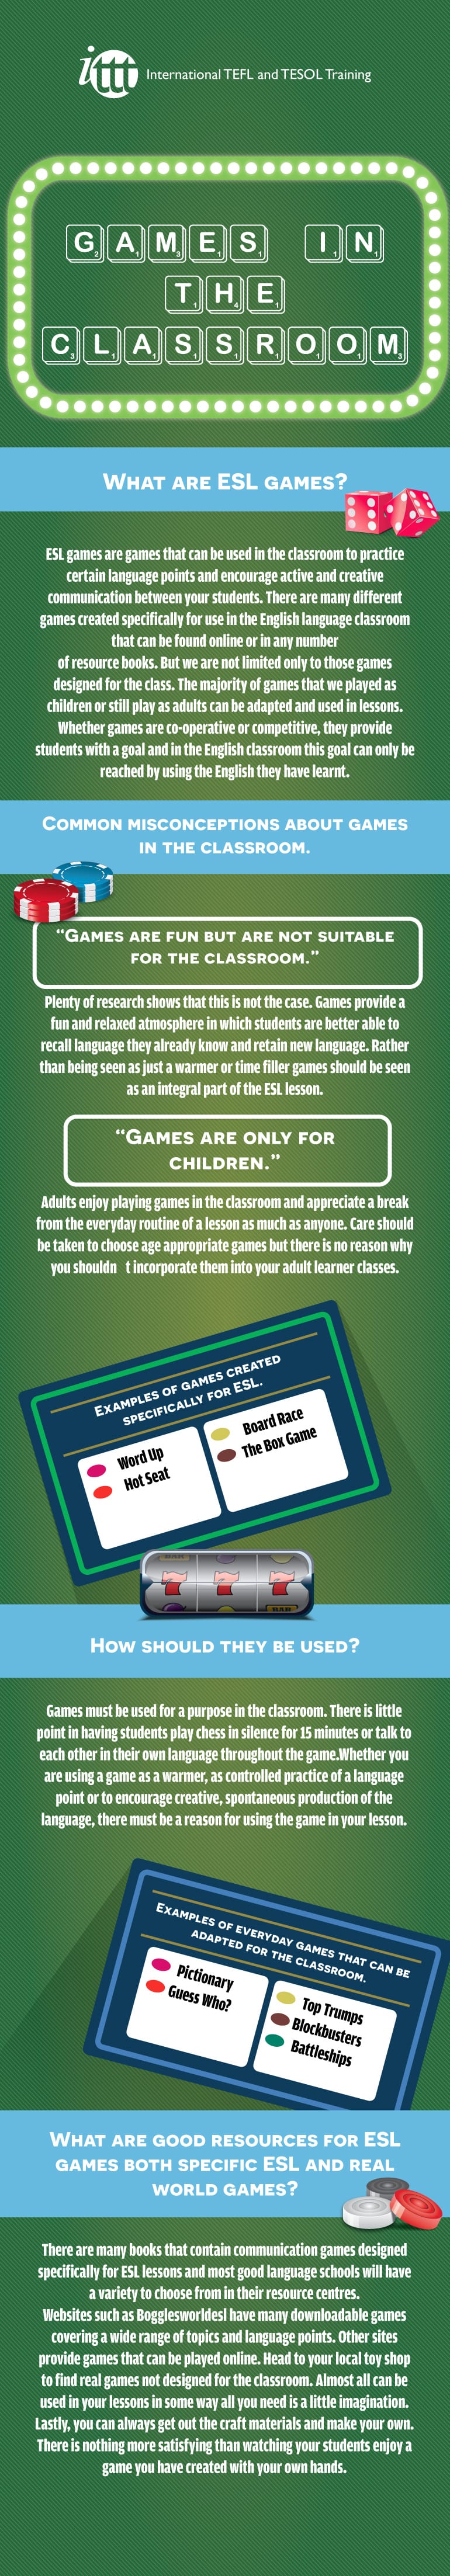 Infographic Games in the Classroom